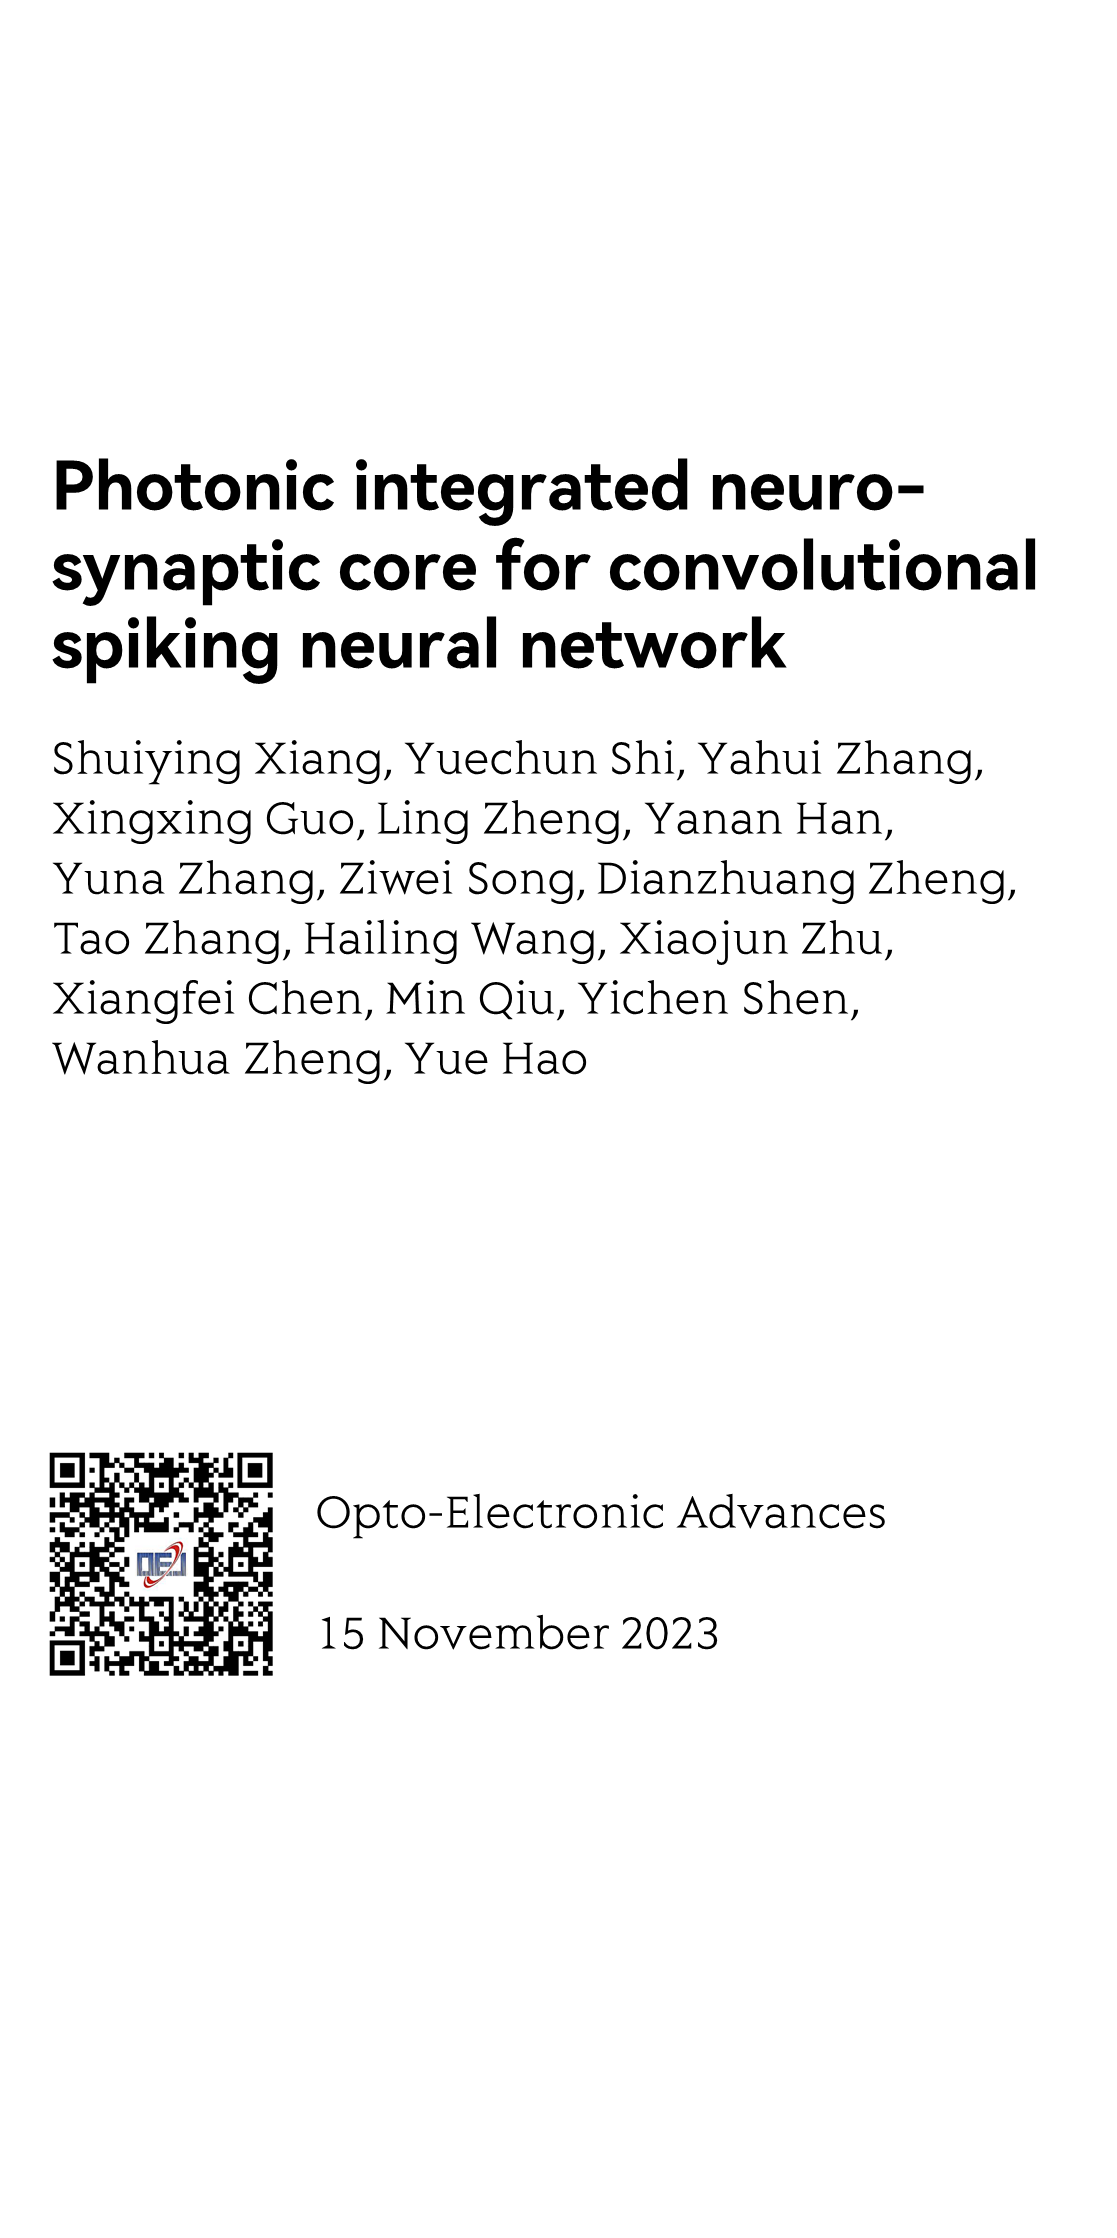 Photonic integrated neuro-synaptic core for convolutional spiking neural network_1